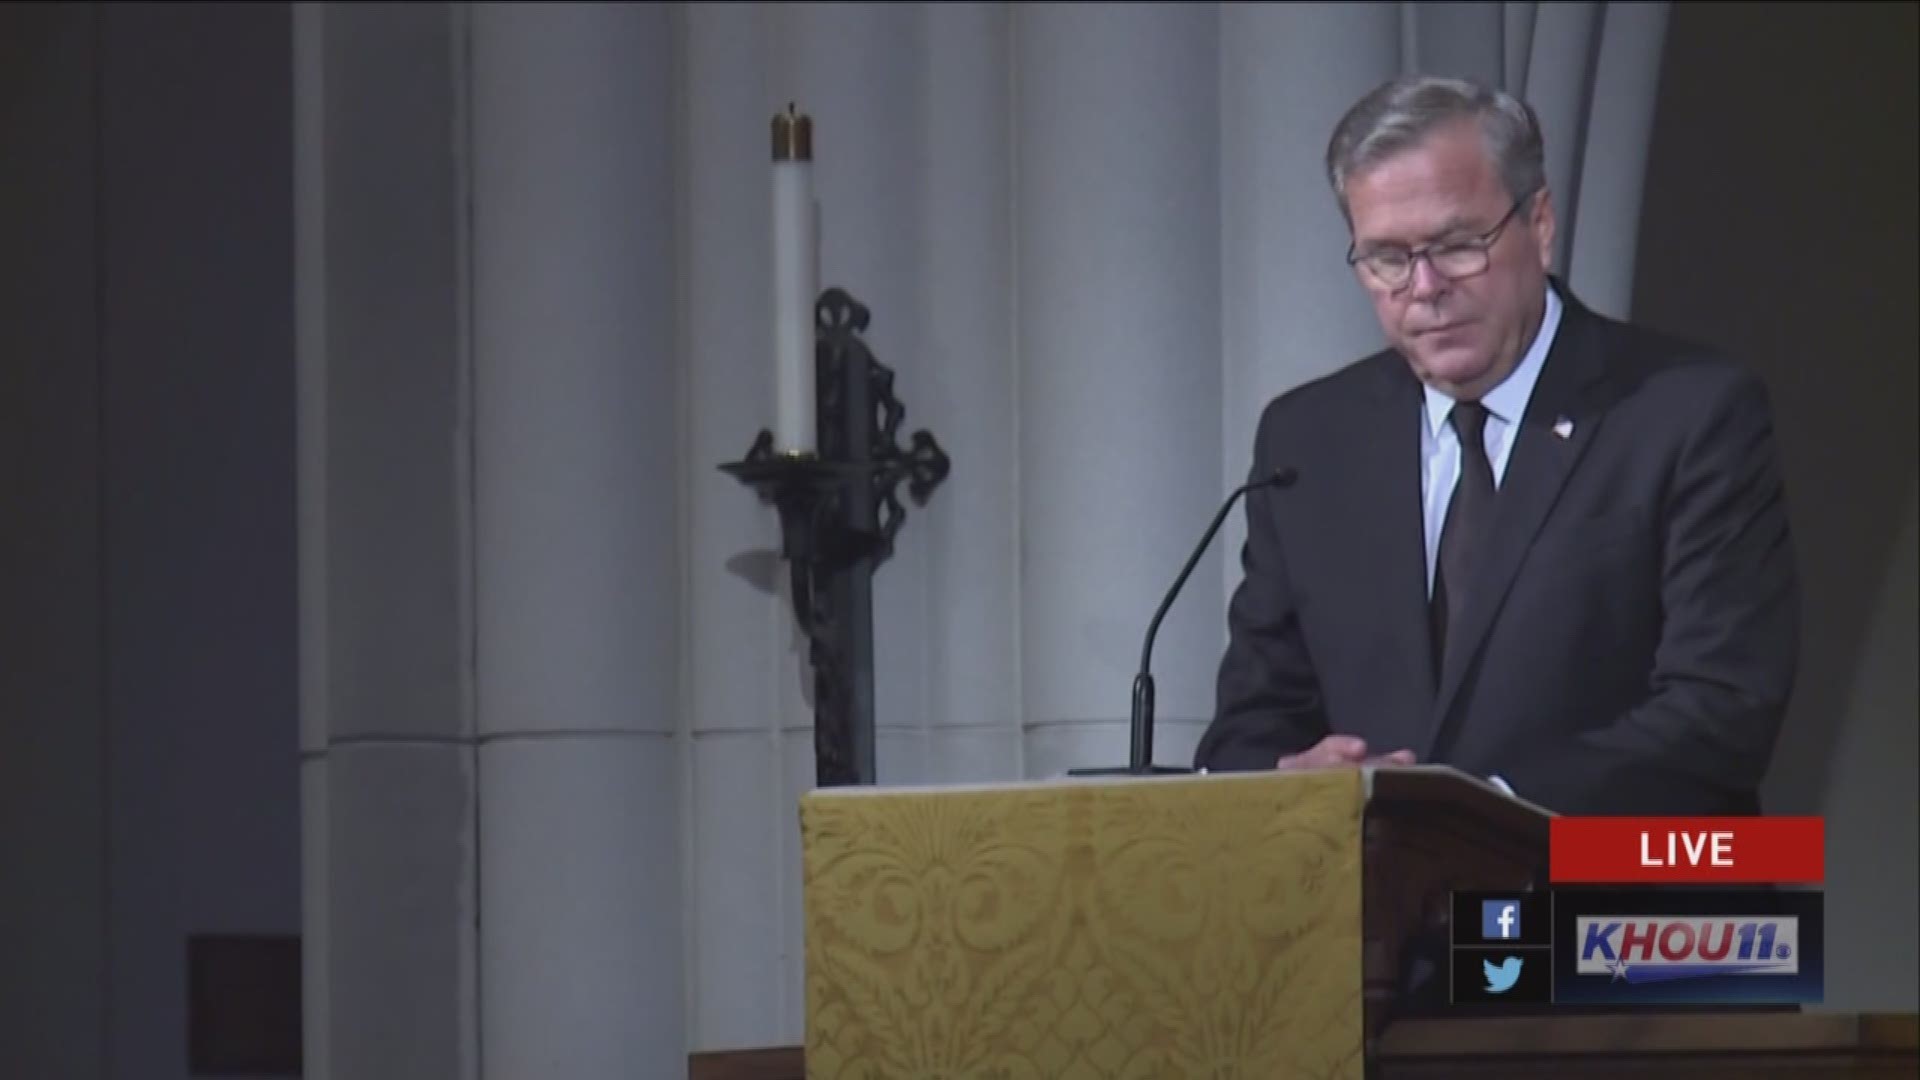 Presidential historian Jon Meacham, a long-time friend of Barbara Bush, Susan Baker, and son Jeb Bush deliver eulogies about the former First Lady during her funeral service at St. Martin's Church.